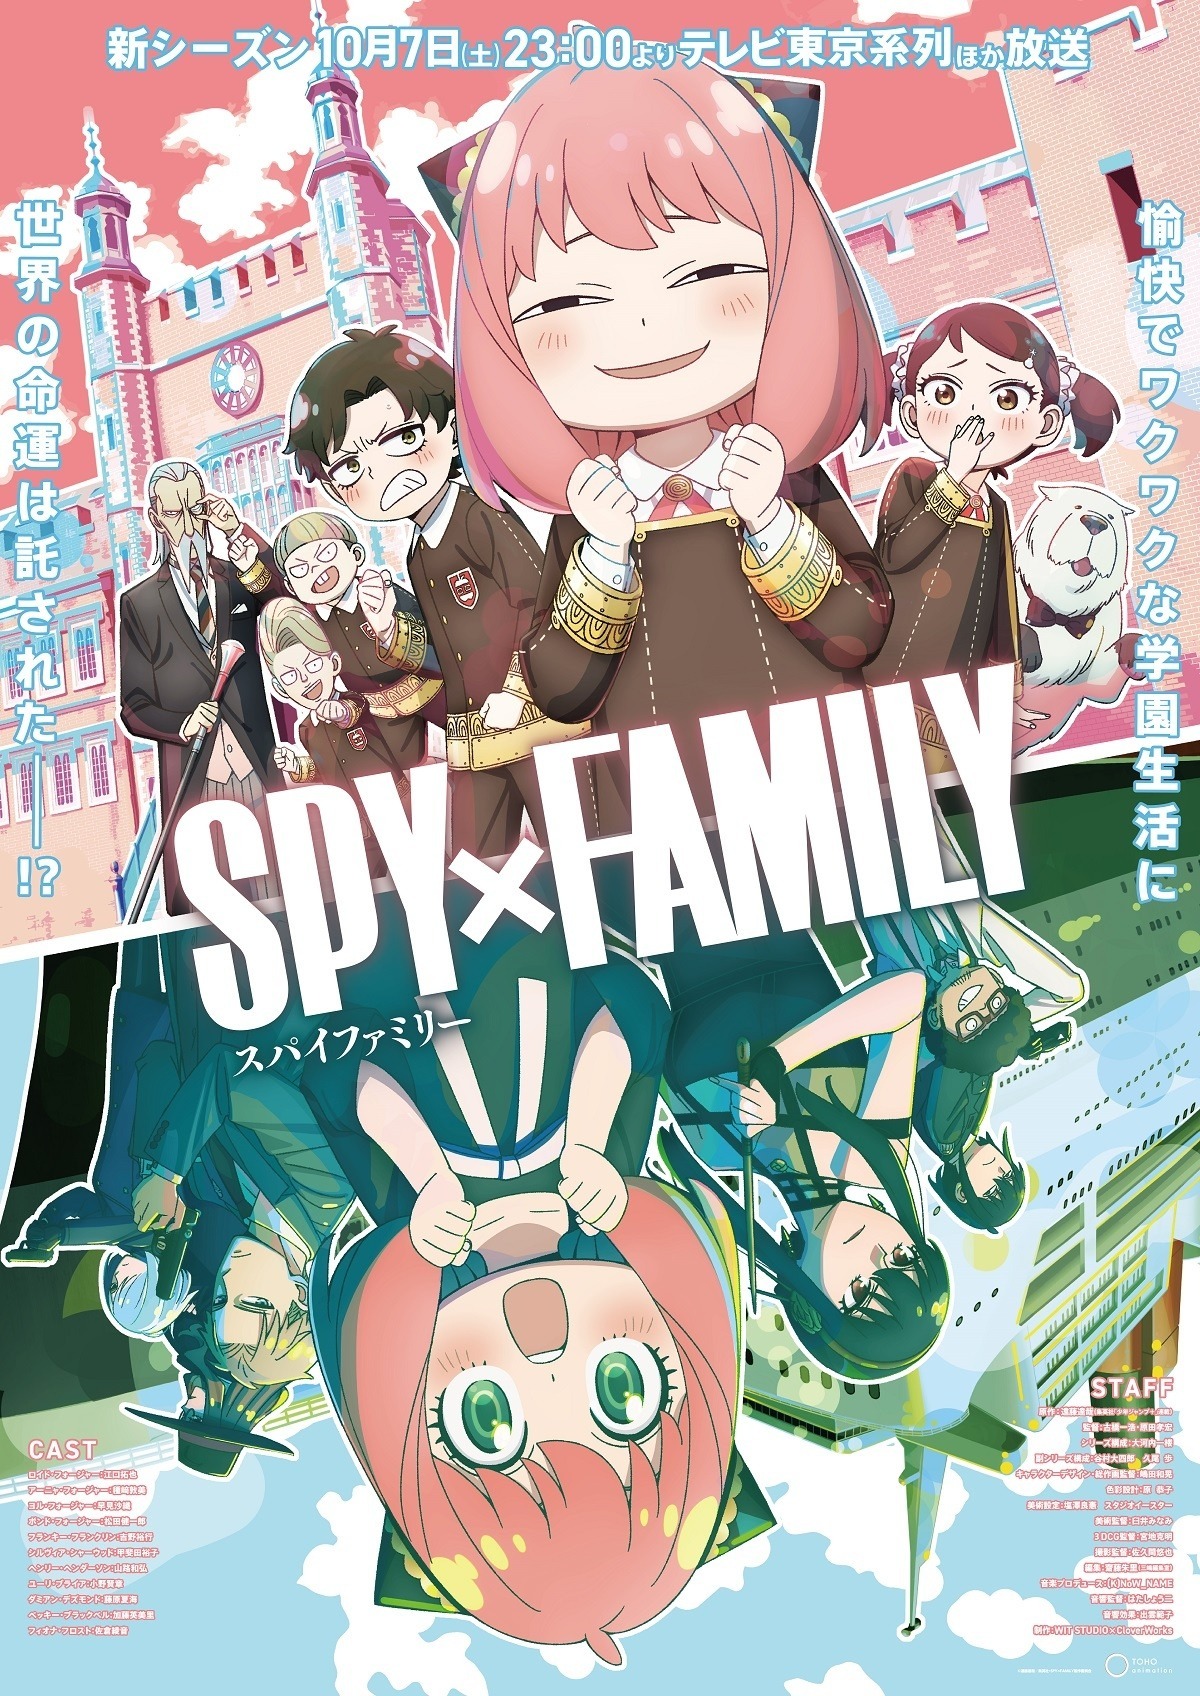 Spy x Family Part 2 To Be Released In Oct, Trailer Shows A